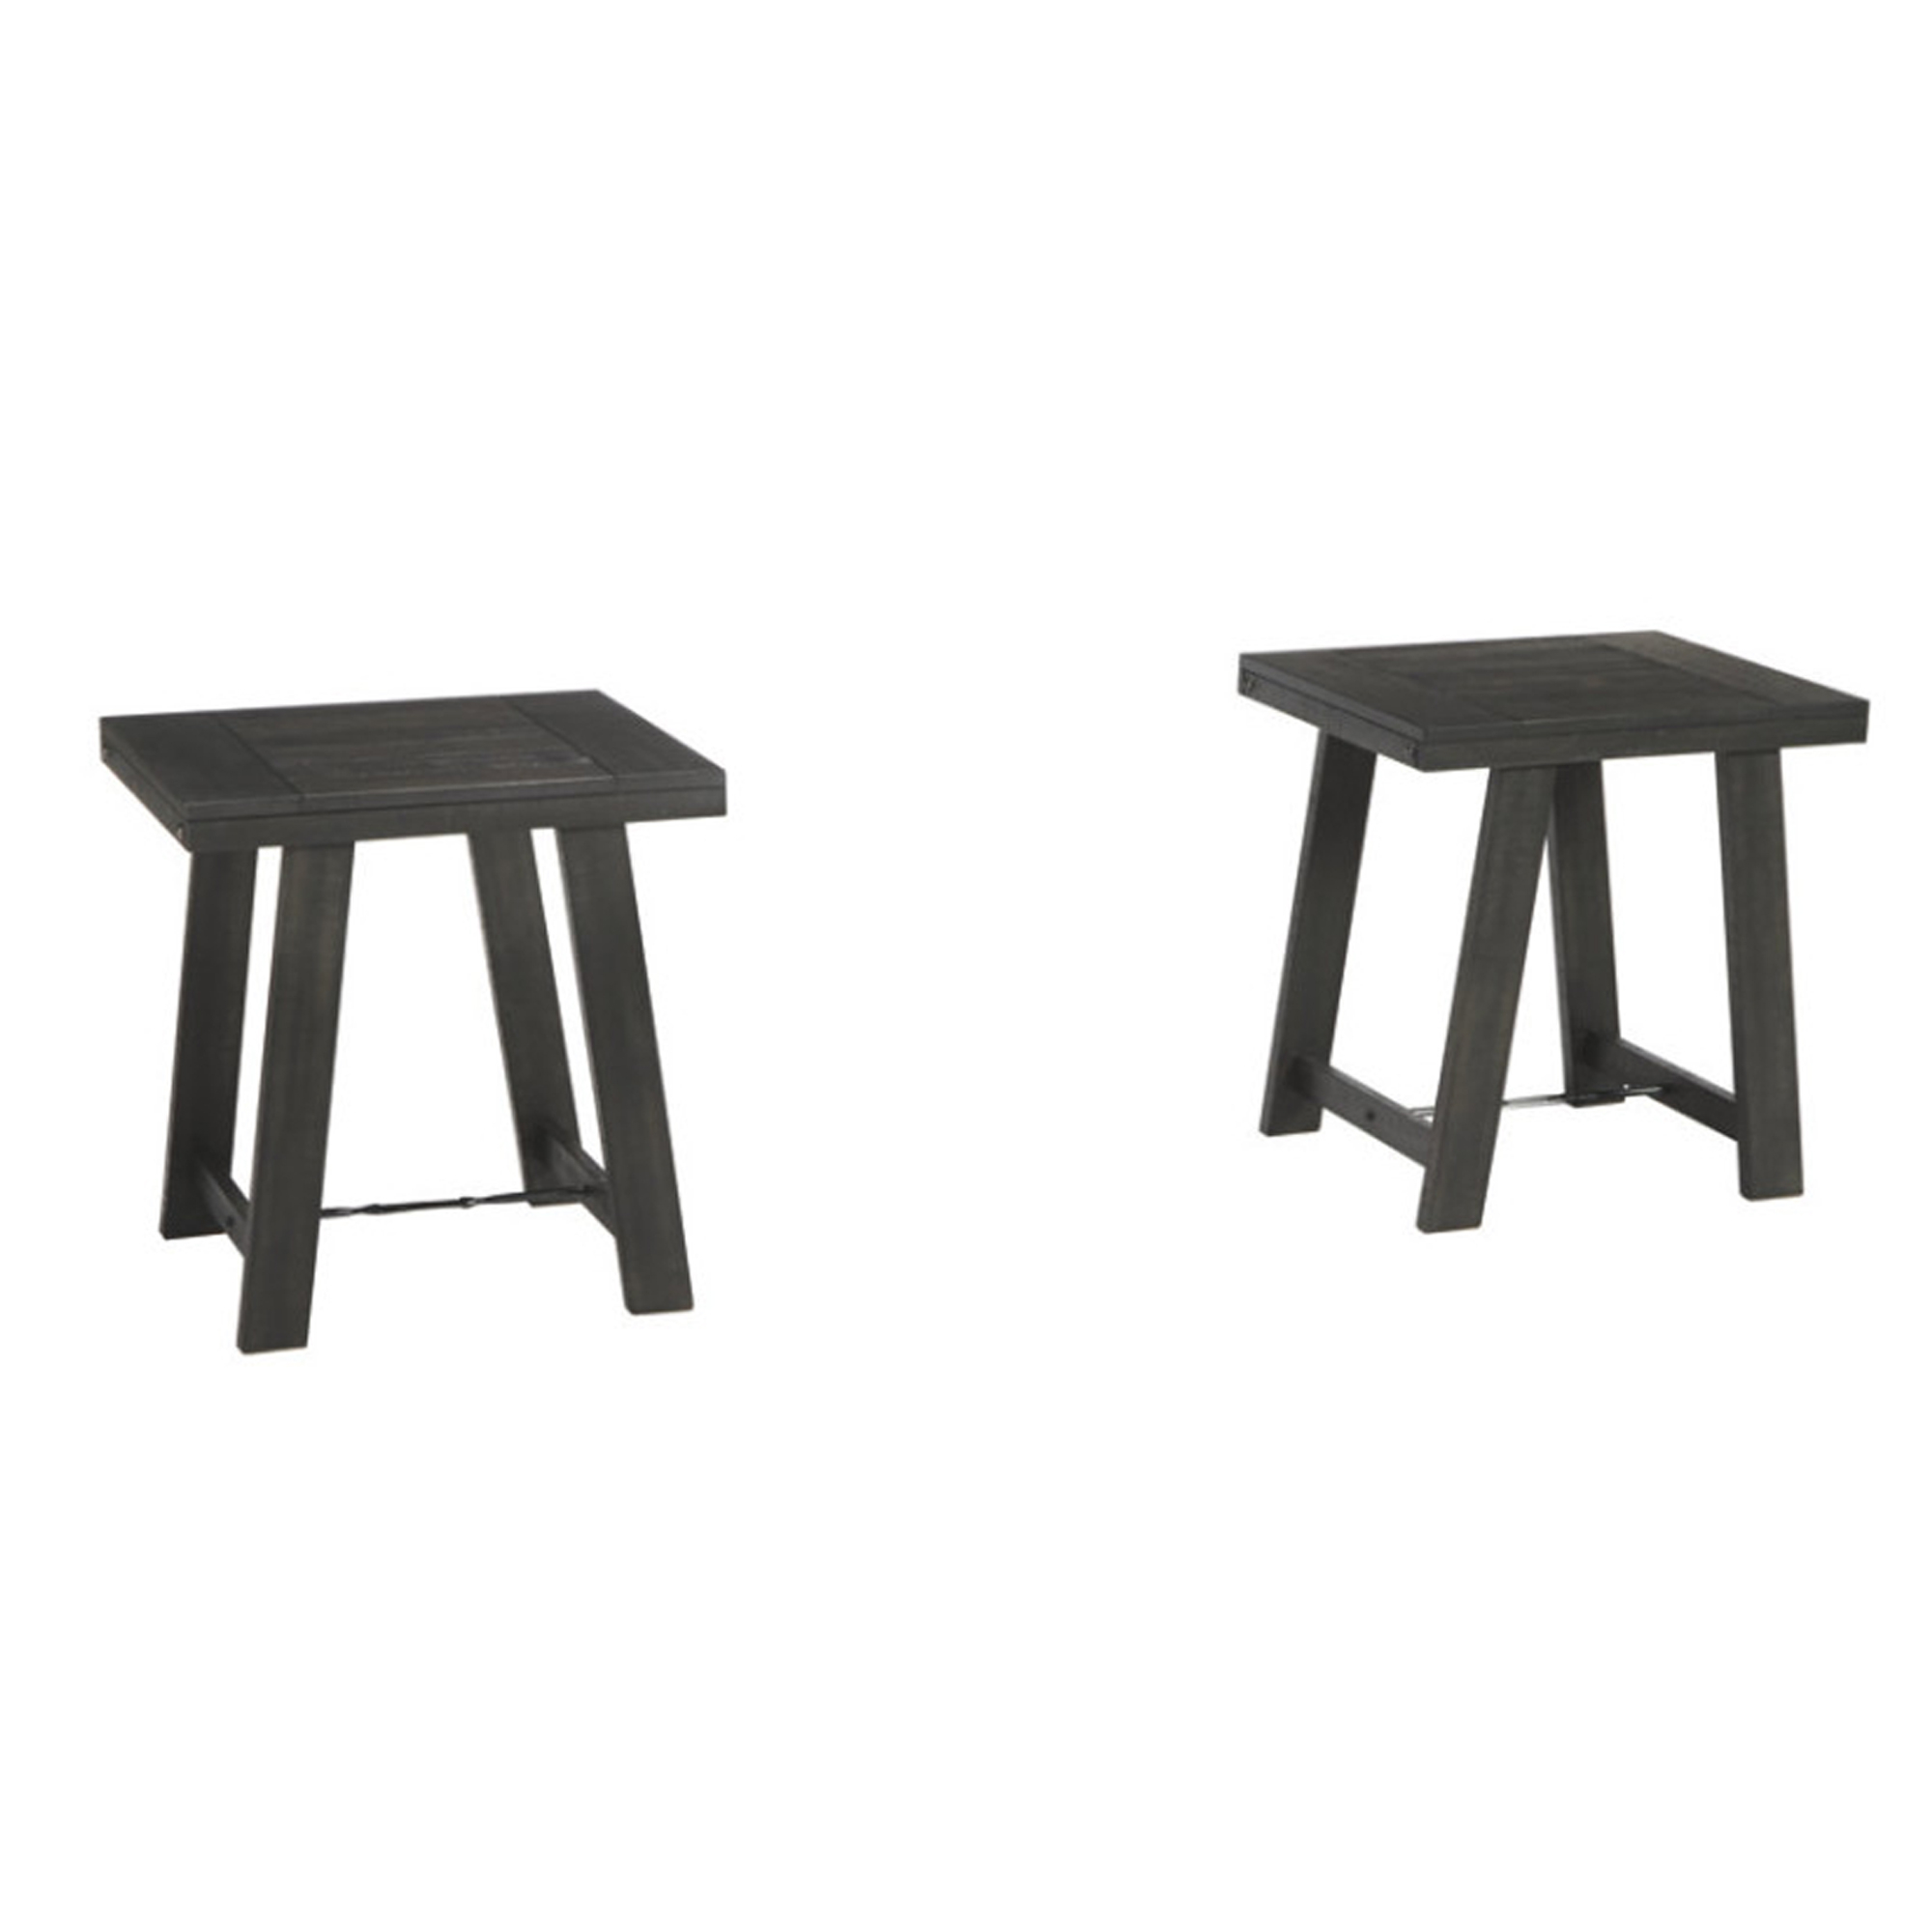 Plank Style Acacia Wood Table Set With Canted Legs, Set Of Three, Black- Saltoro Sherpi